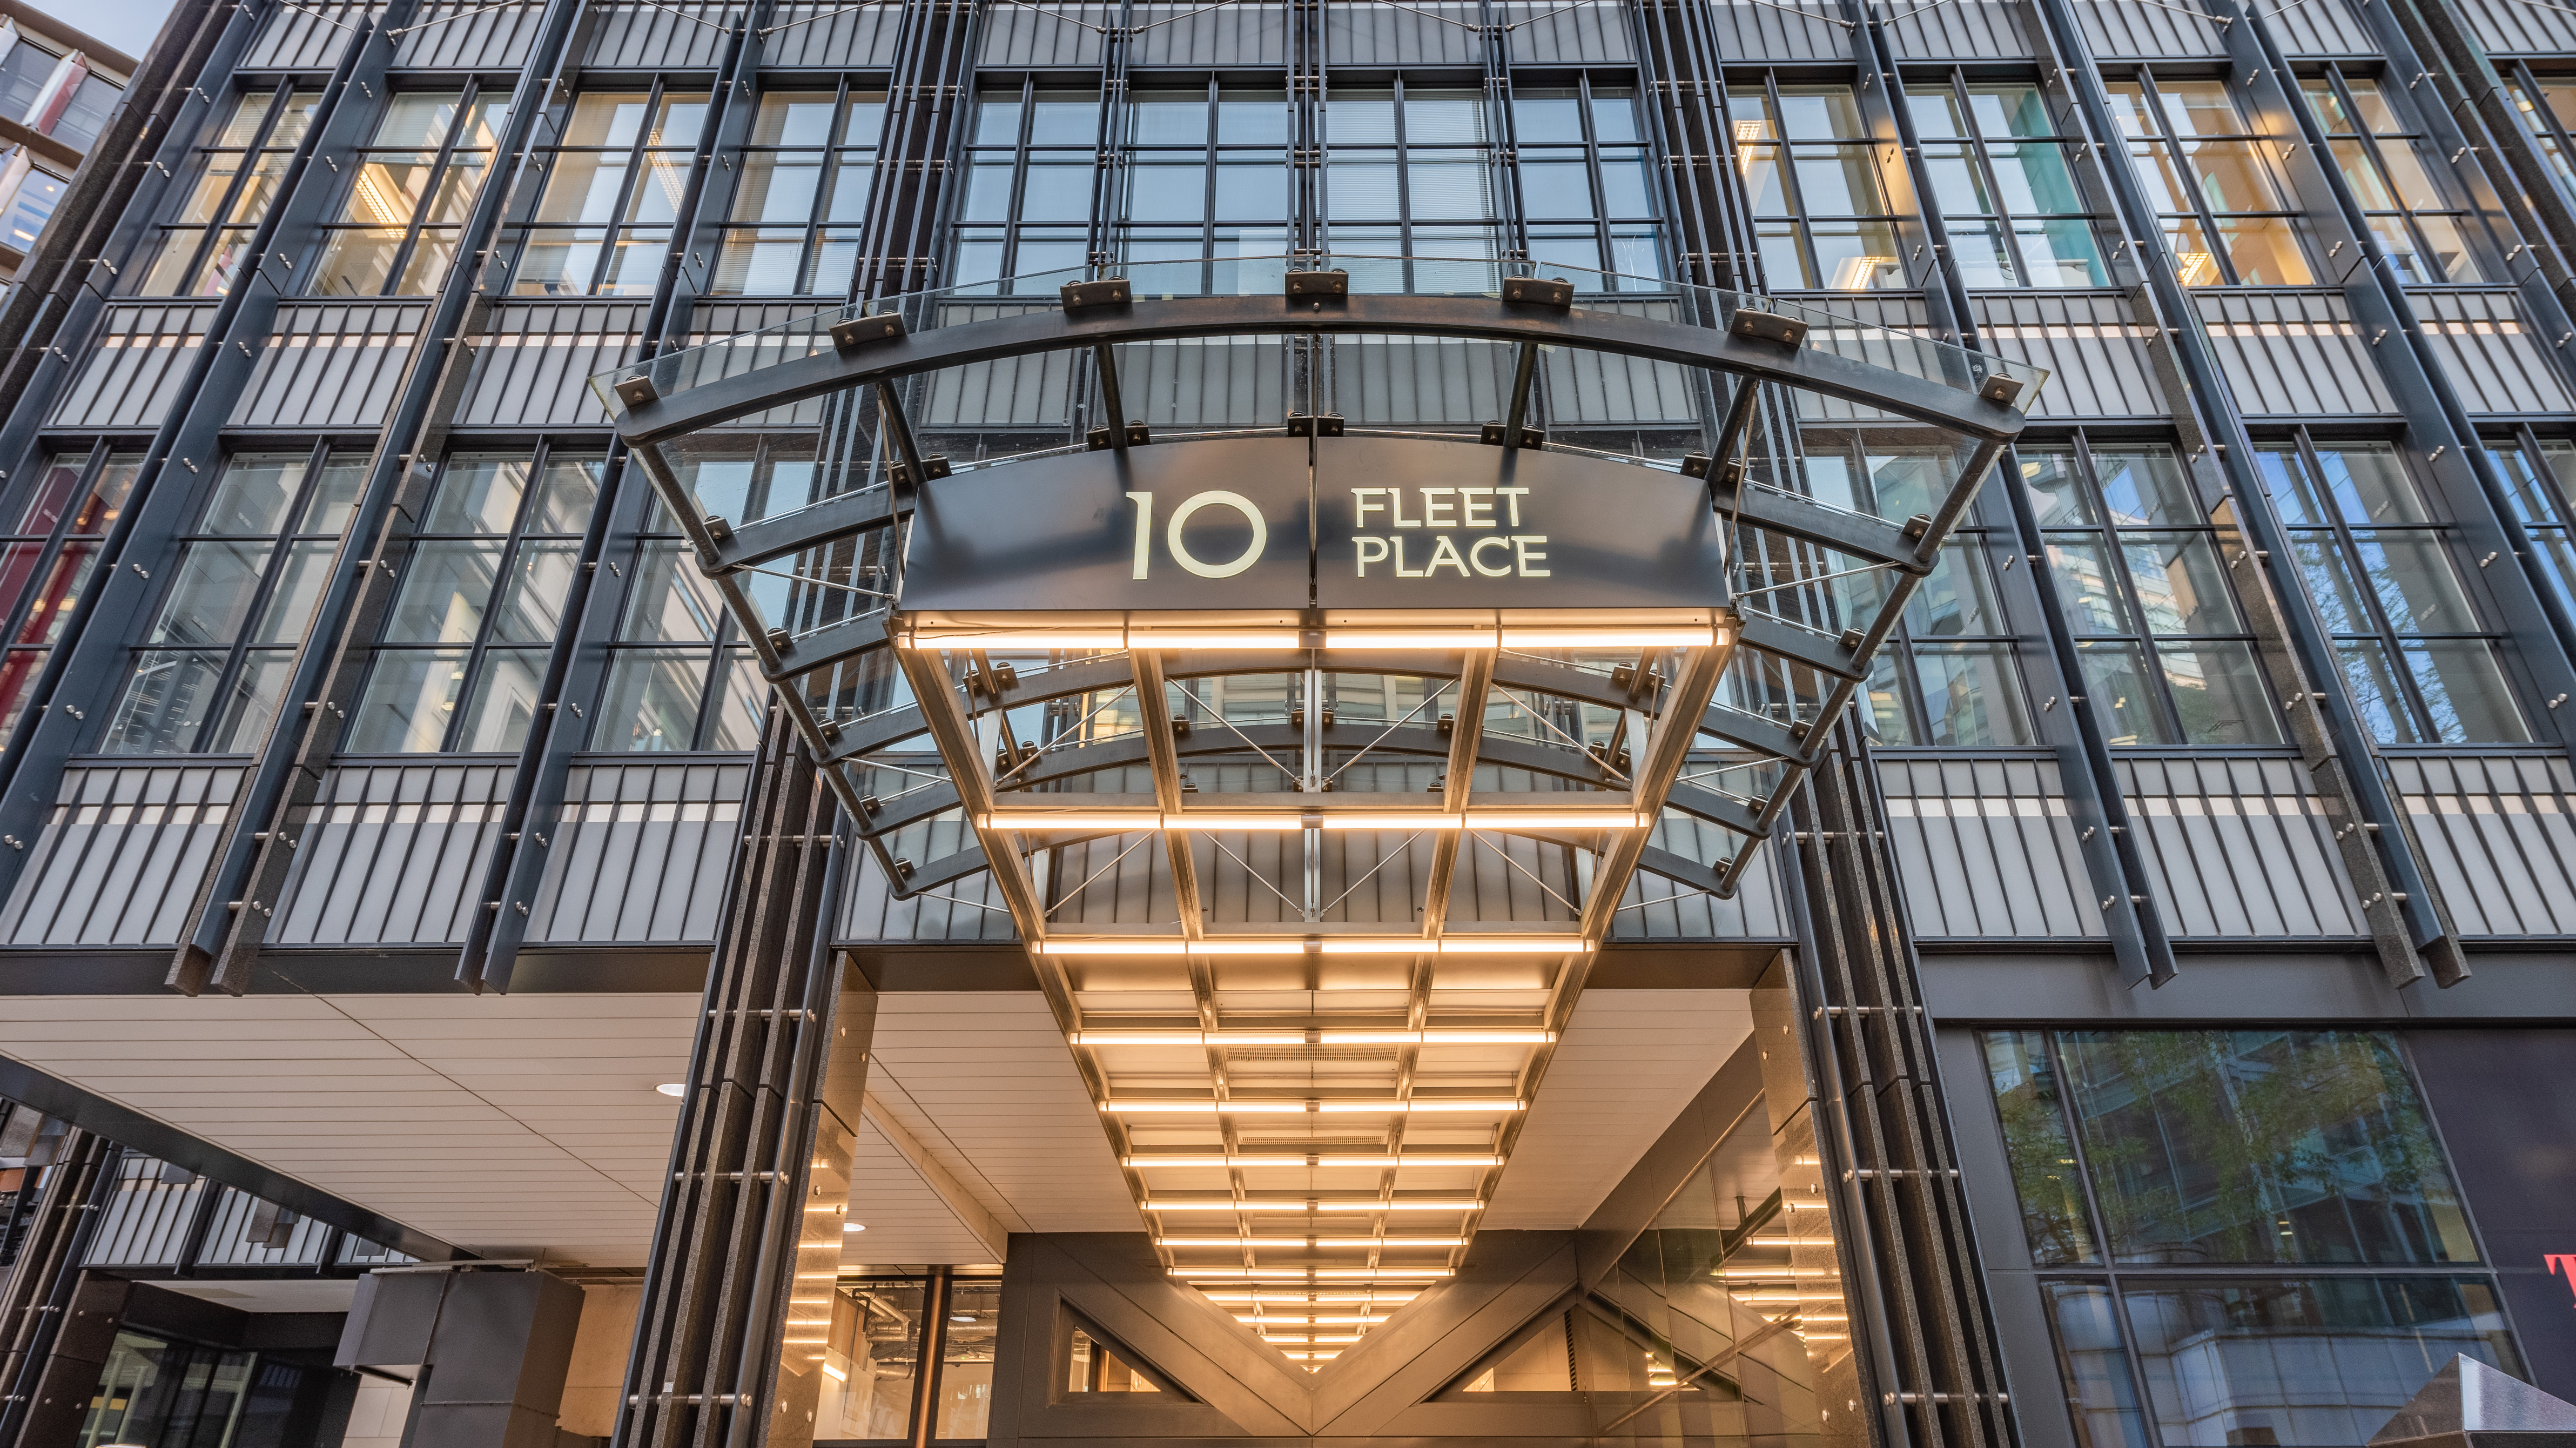 MOTT MACDONALD MAKES FURTHER COMMITMENT TO 10 FLEET PLACE, LONDON EC4 – WILL NOW OCCUPY 60,000 SQ FT IN THE BUILDING